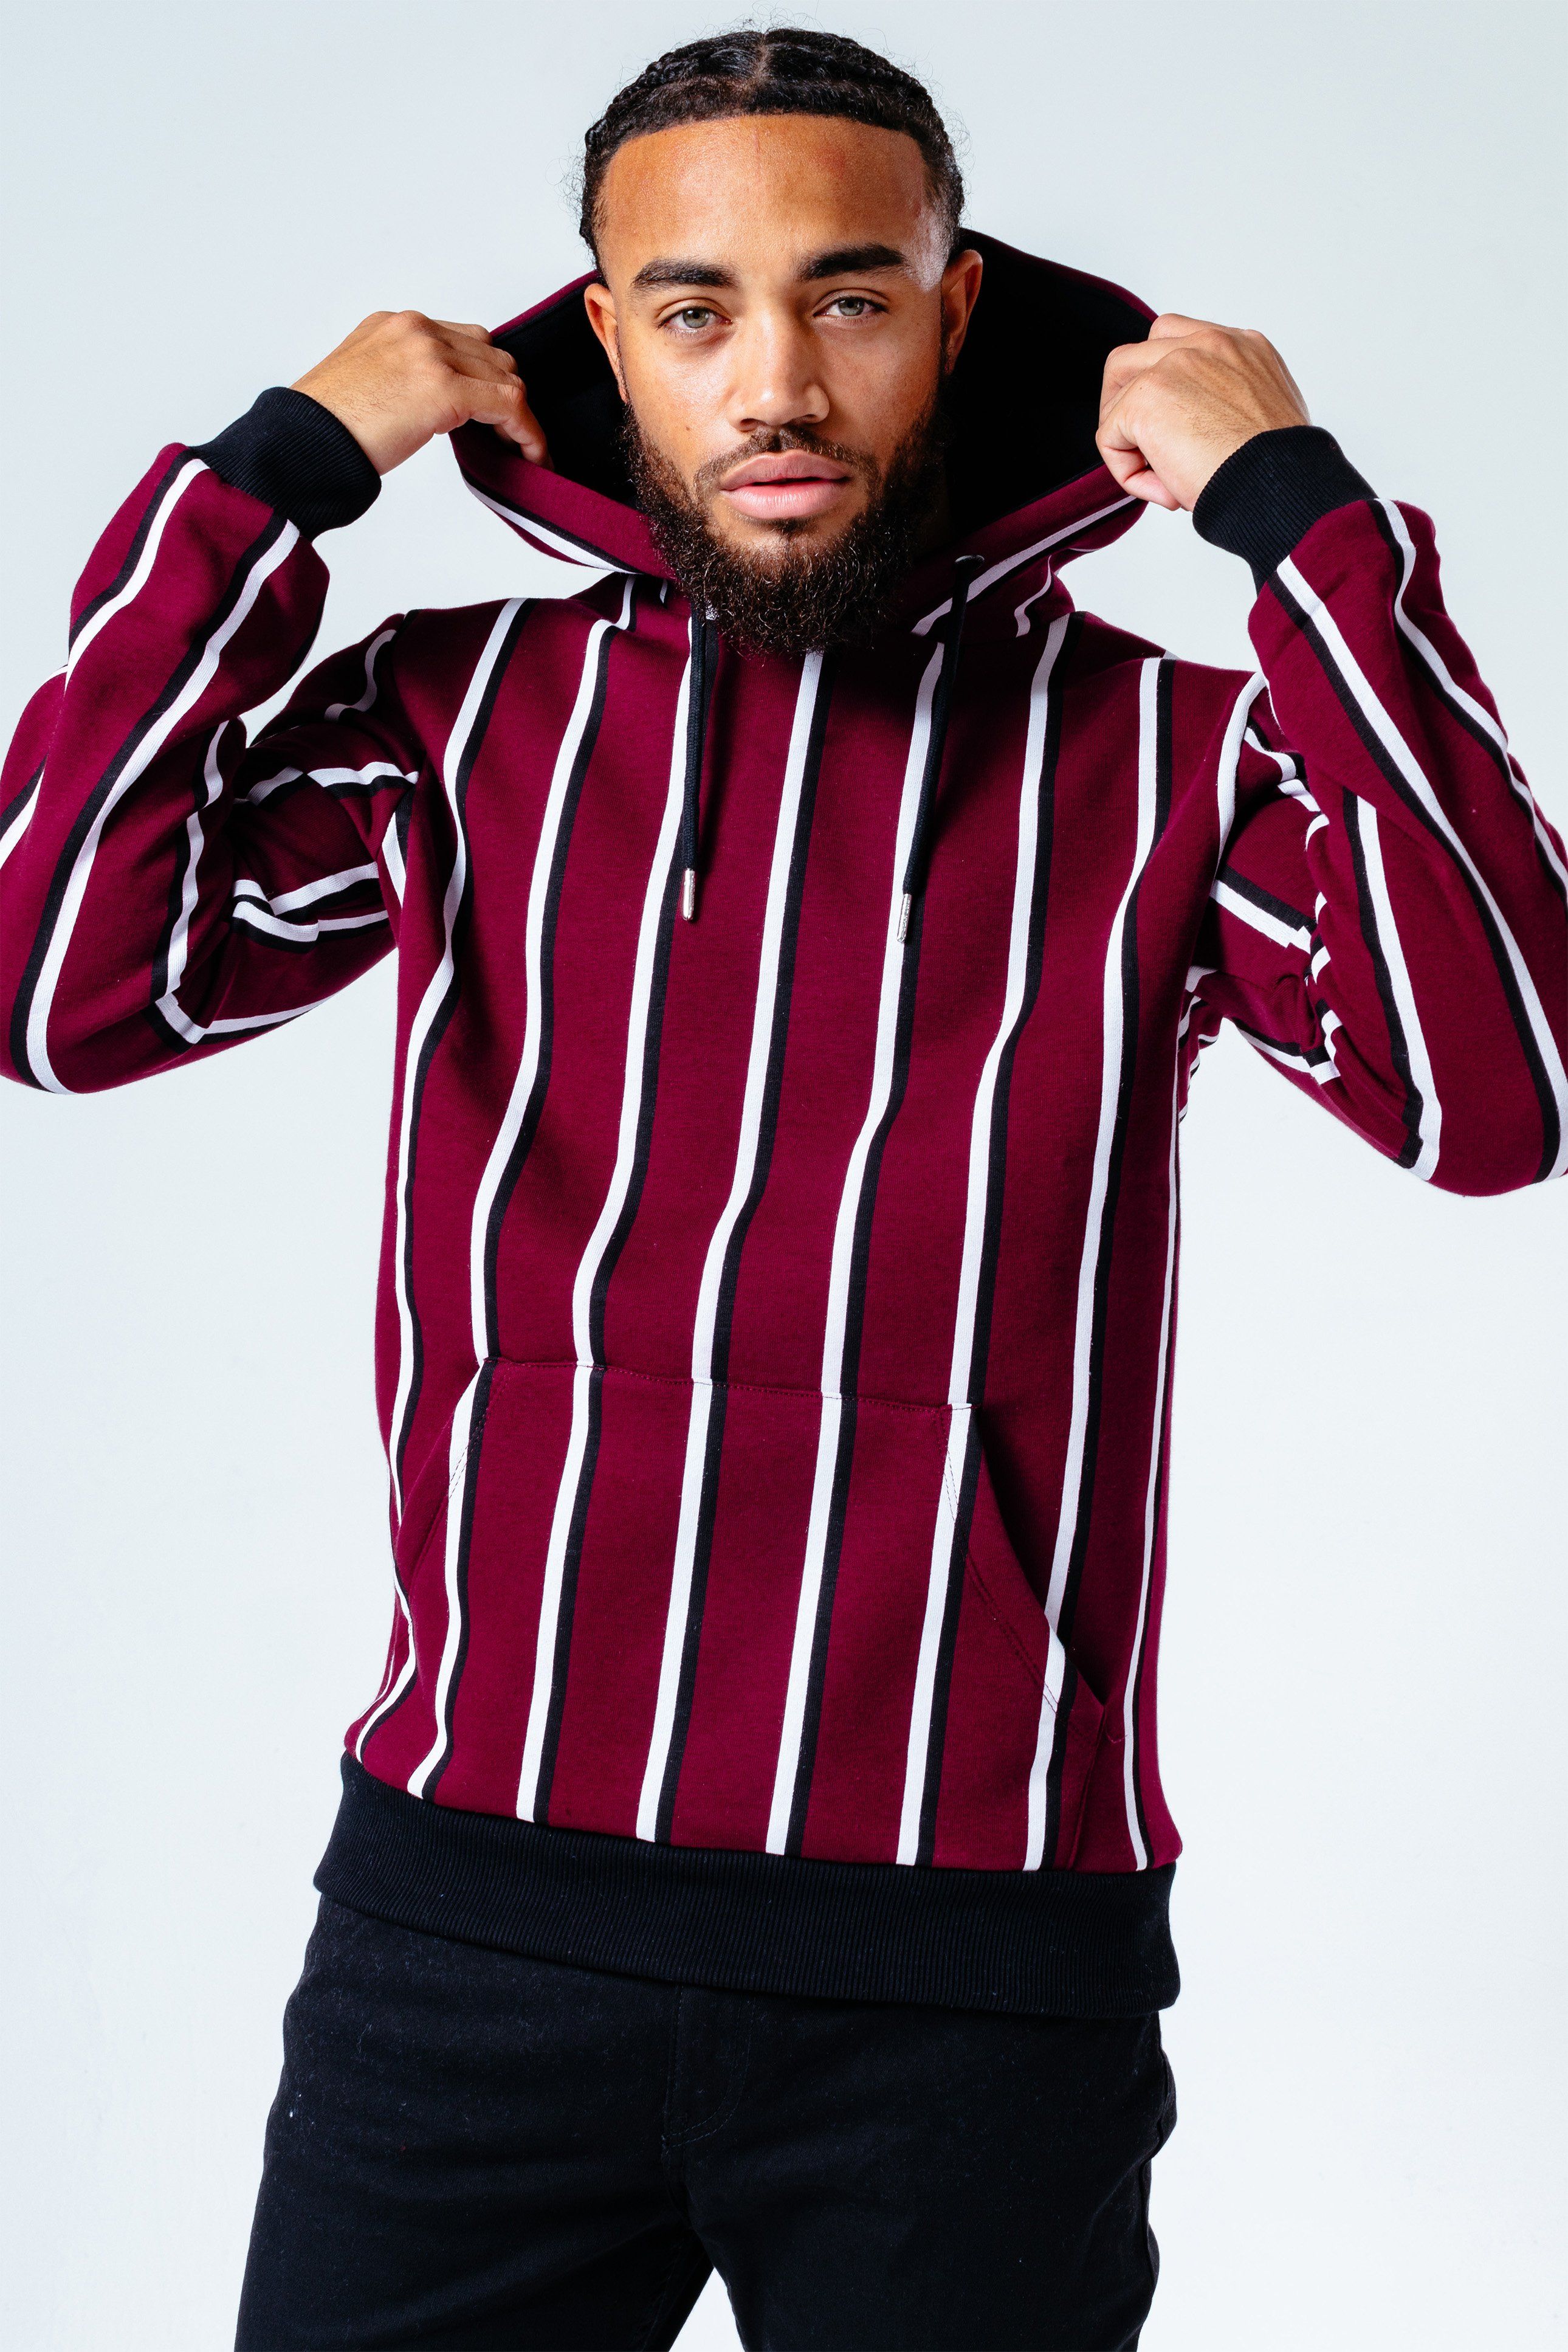 The HYPE. burgundy stripe men's hoodie pairs perfectly with the HYPE. men's black joggers for an off-duty relaxed look. Coming in with a burgundy, white and black colour palette in an 80% cotton and 20% polyester fabric base for supreme comfort. Designed in our standard men's pullover shape, with a fixed hood, kangaroo pocket, elastic waist and ribbed cuffs for a snug feel, finished with an embroidered embossed patch on the sleeve. Machine wash at 30 degrees.